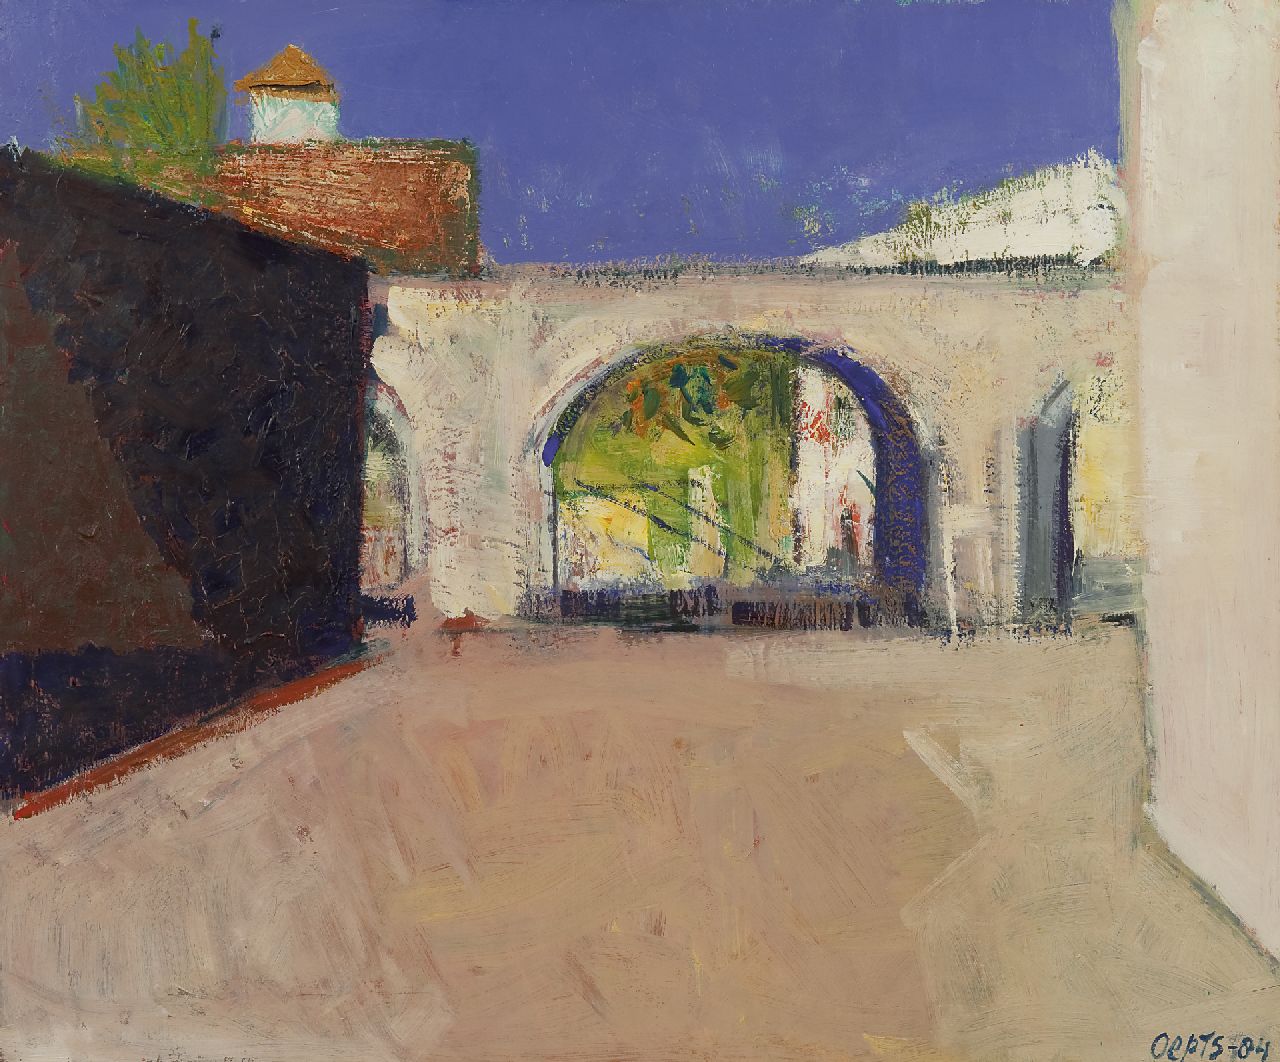 Oepts W.A.  | Willem Anthonie 'Wim' Oepts, Aquaduct at Castries, oil on canvas 54.0 x 65.0 cm, signed l.r. and dated '84